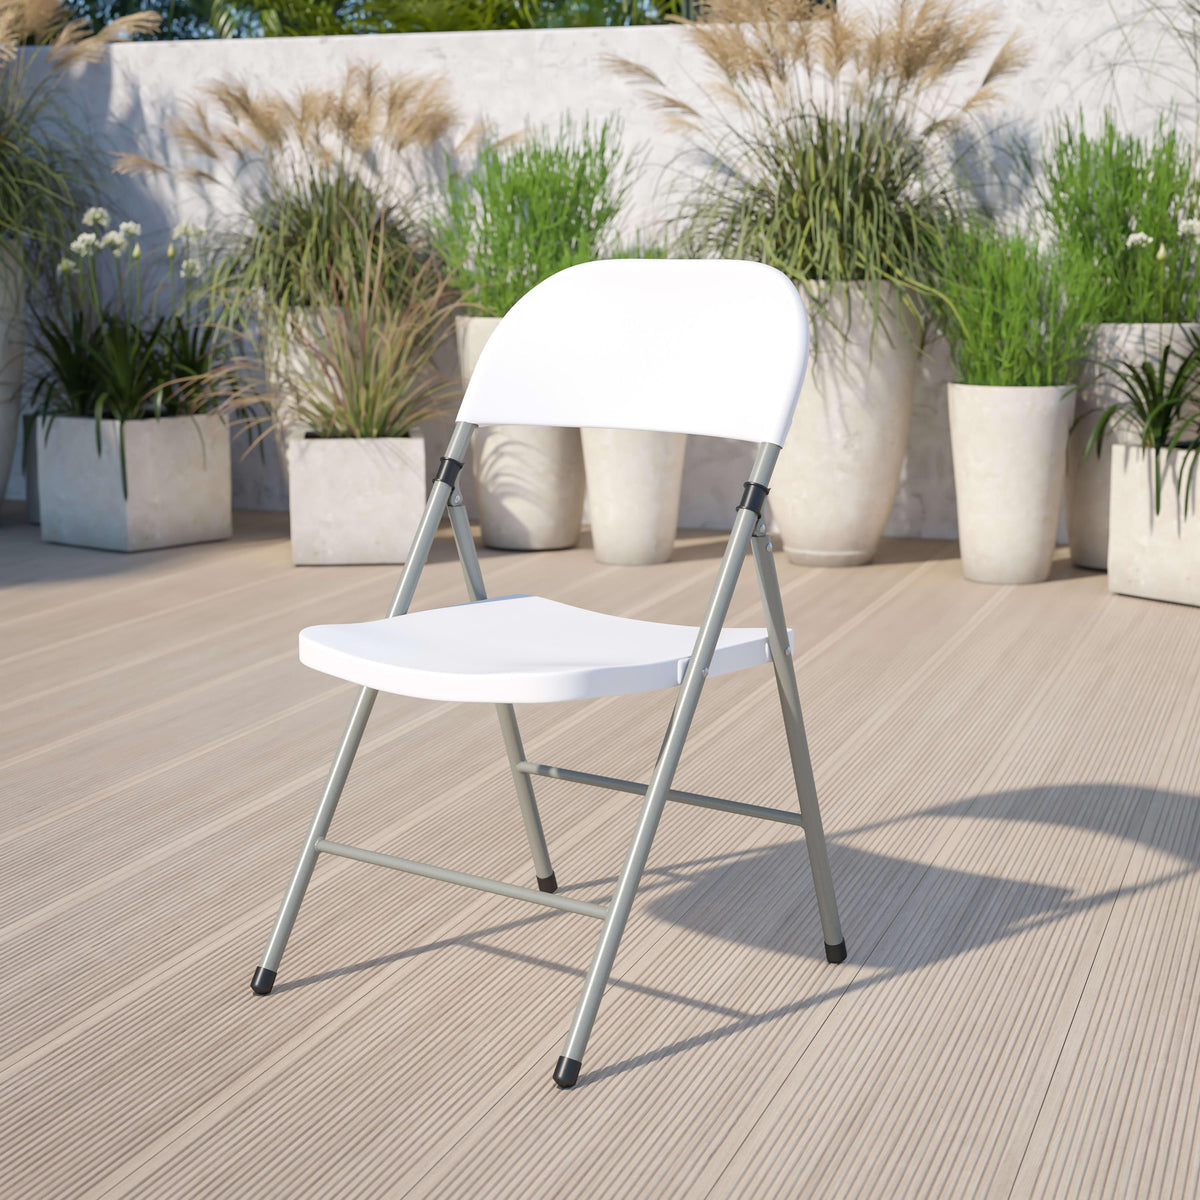 330 lb. Capacity White Plastic Folding Chair with Gray Frame - Event Chair